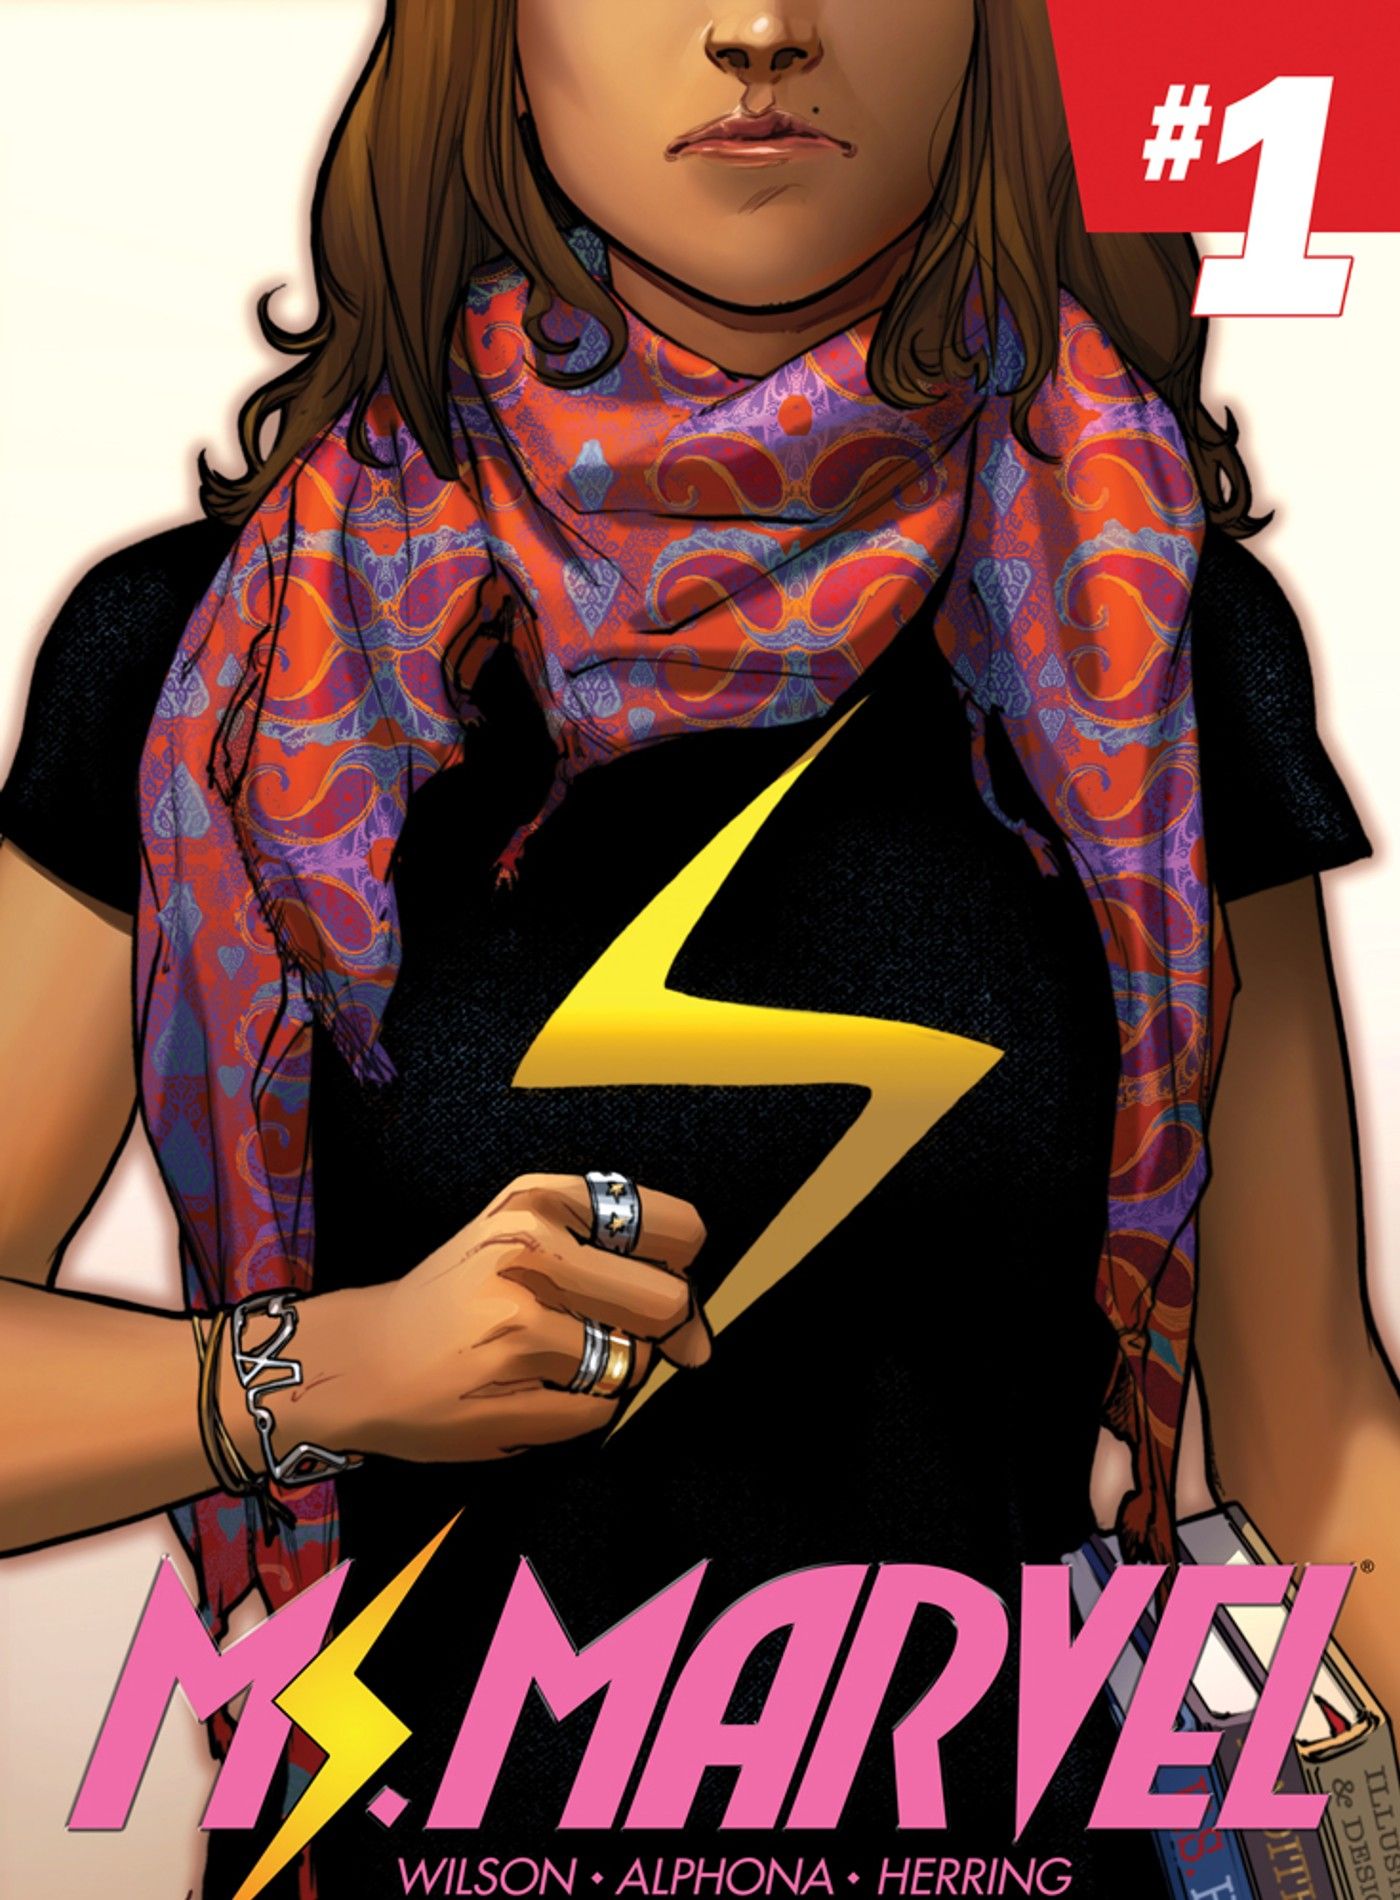 “Nothing’s Going to Sparkle, She’s Not Going to Float”: Ms. Marvel’s MCU Powers Totally Betray Her Creators’ Original Concept